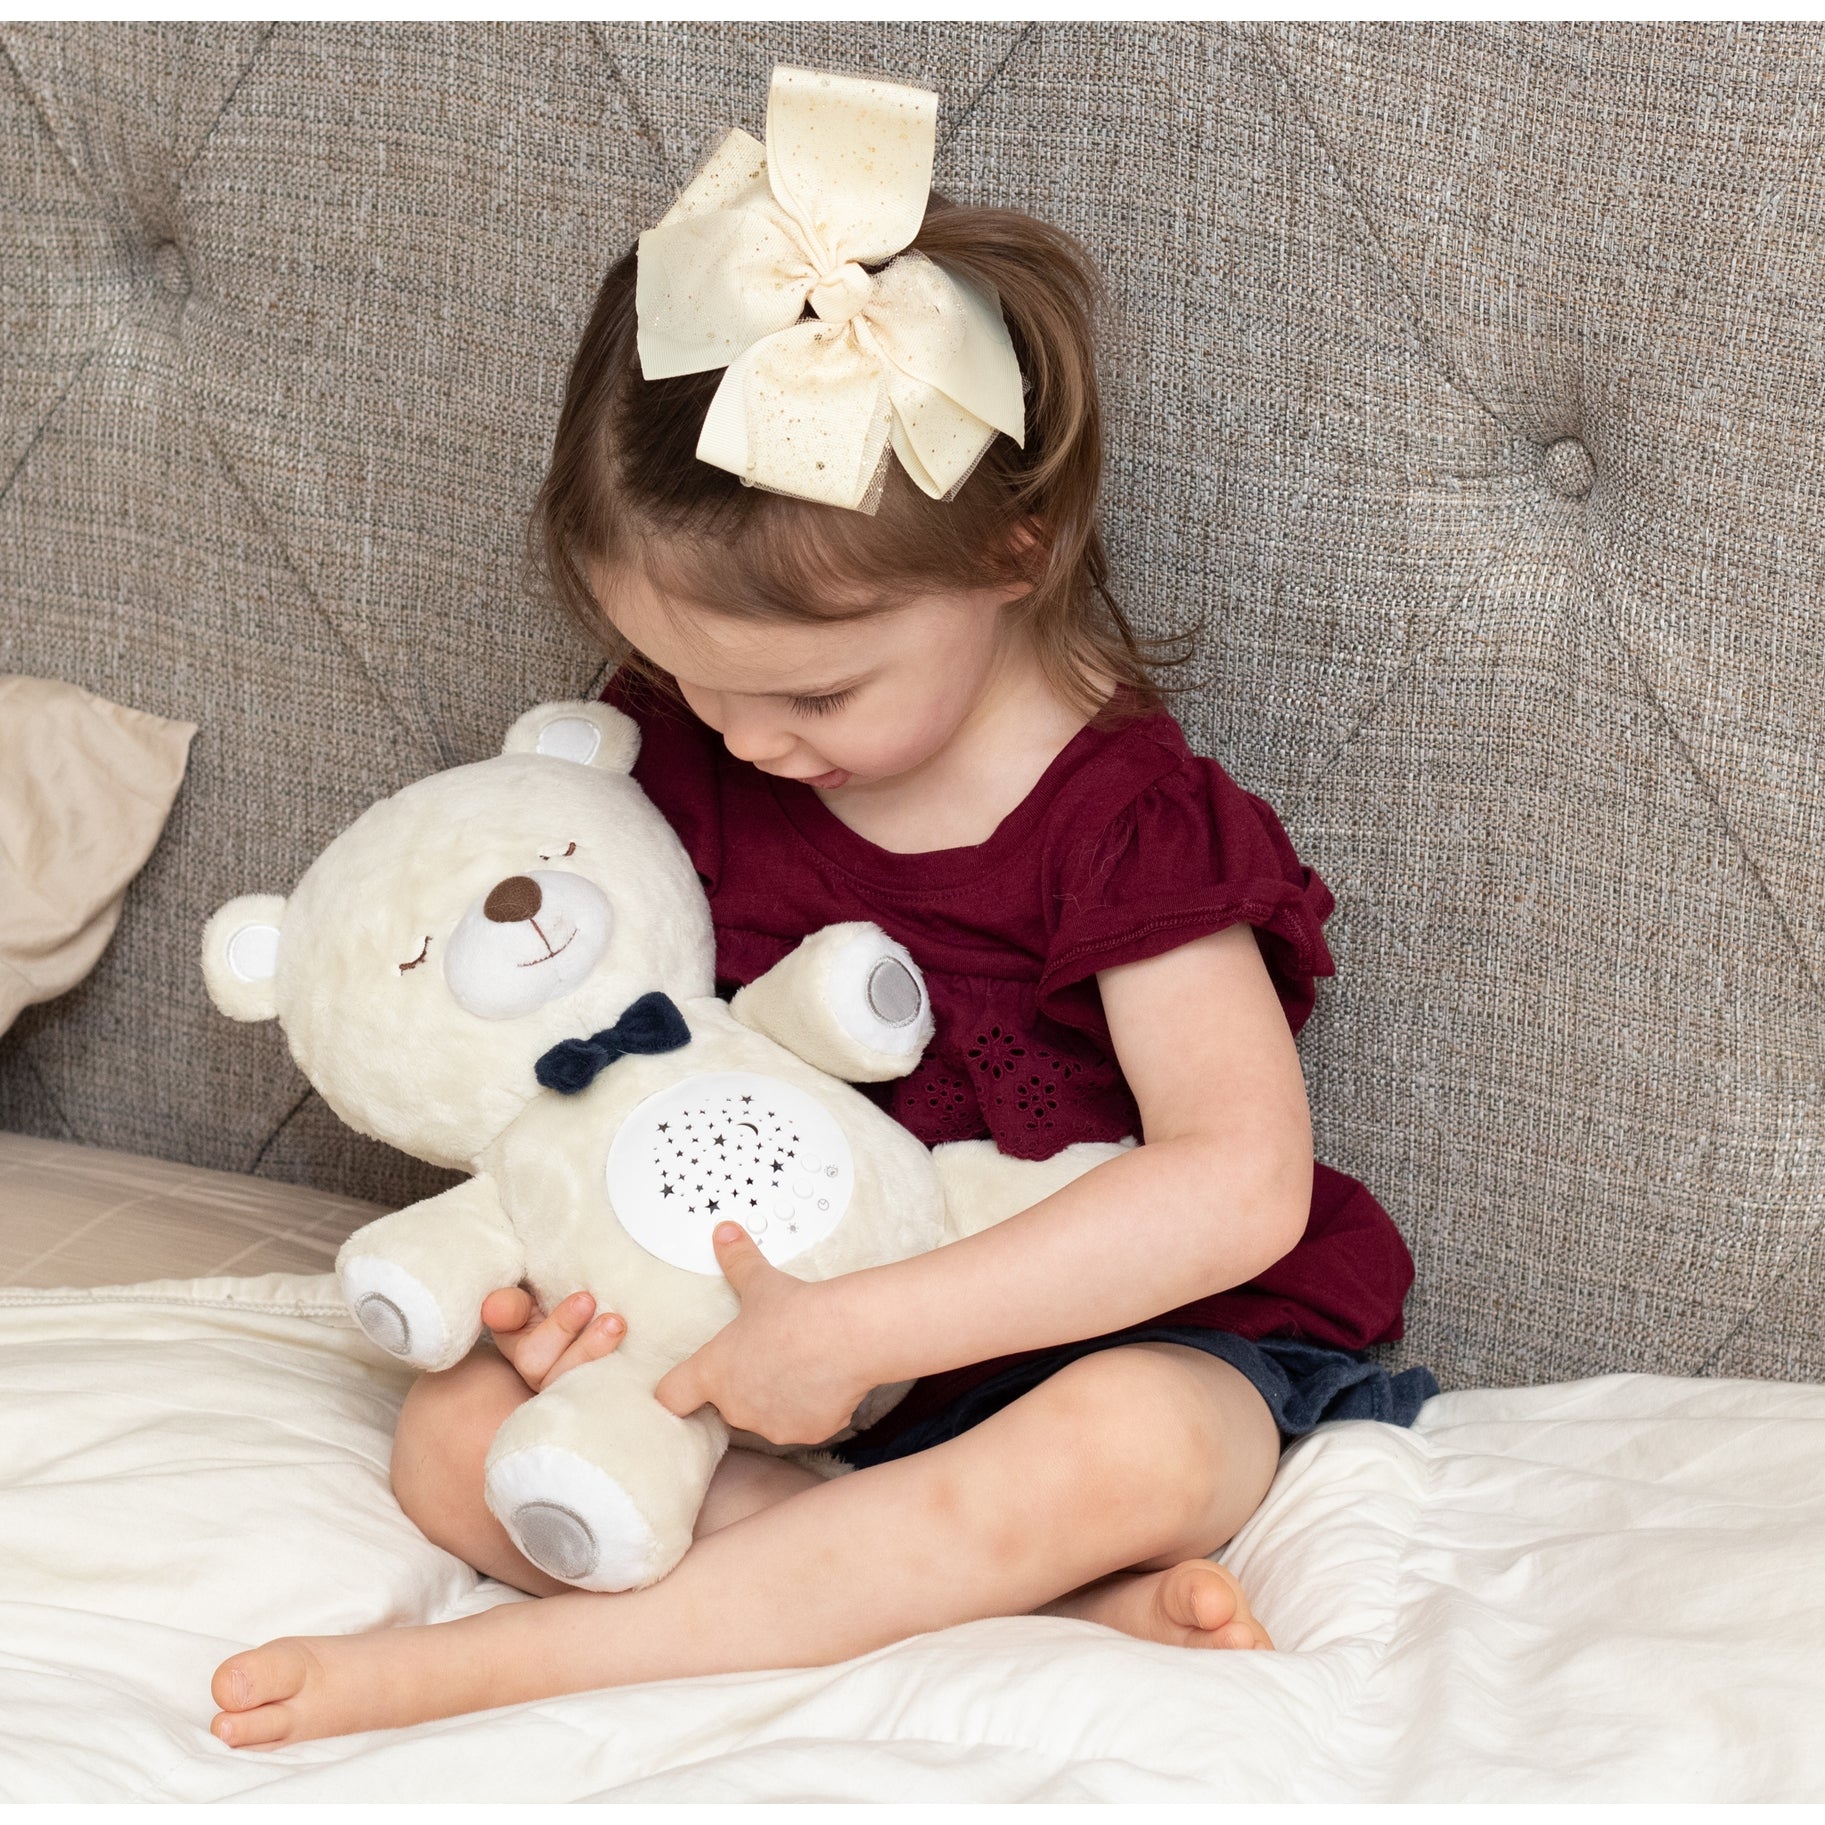 Buy High quality Lumipets® Bear Plush Sound Soother - Baby and Sunshine